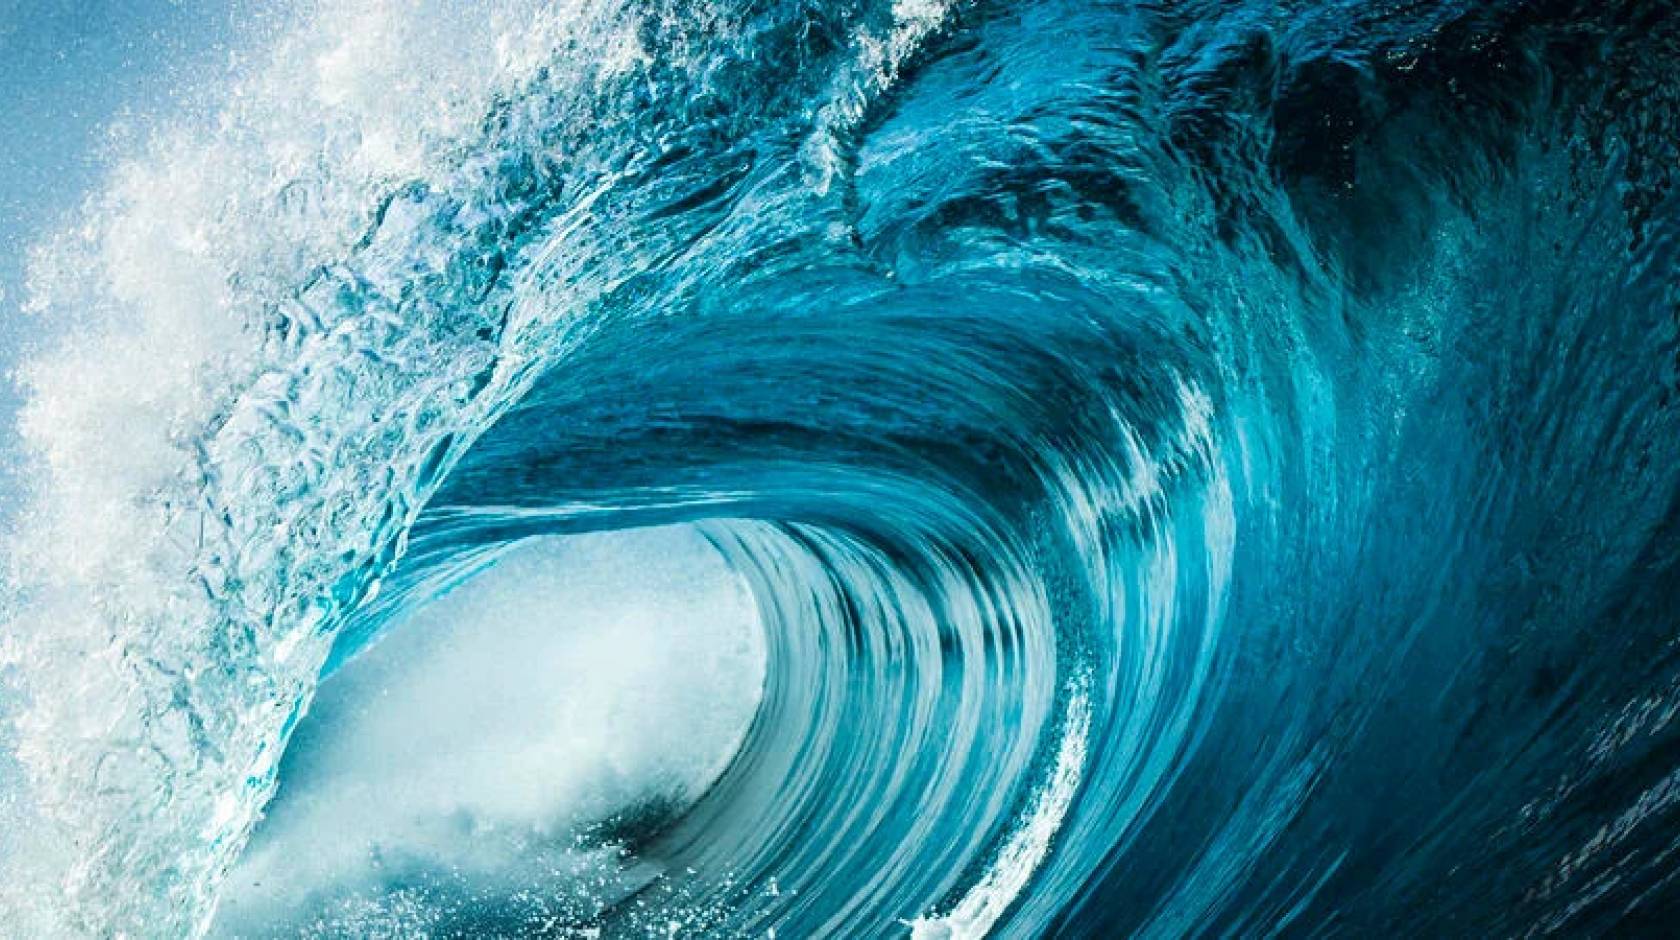 A very blue ocean wave about to crash, seen from the side